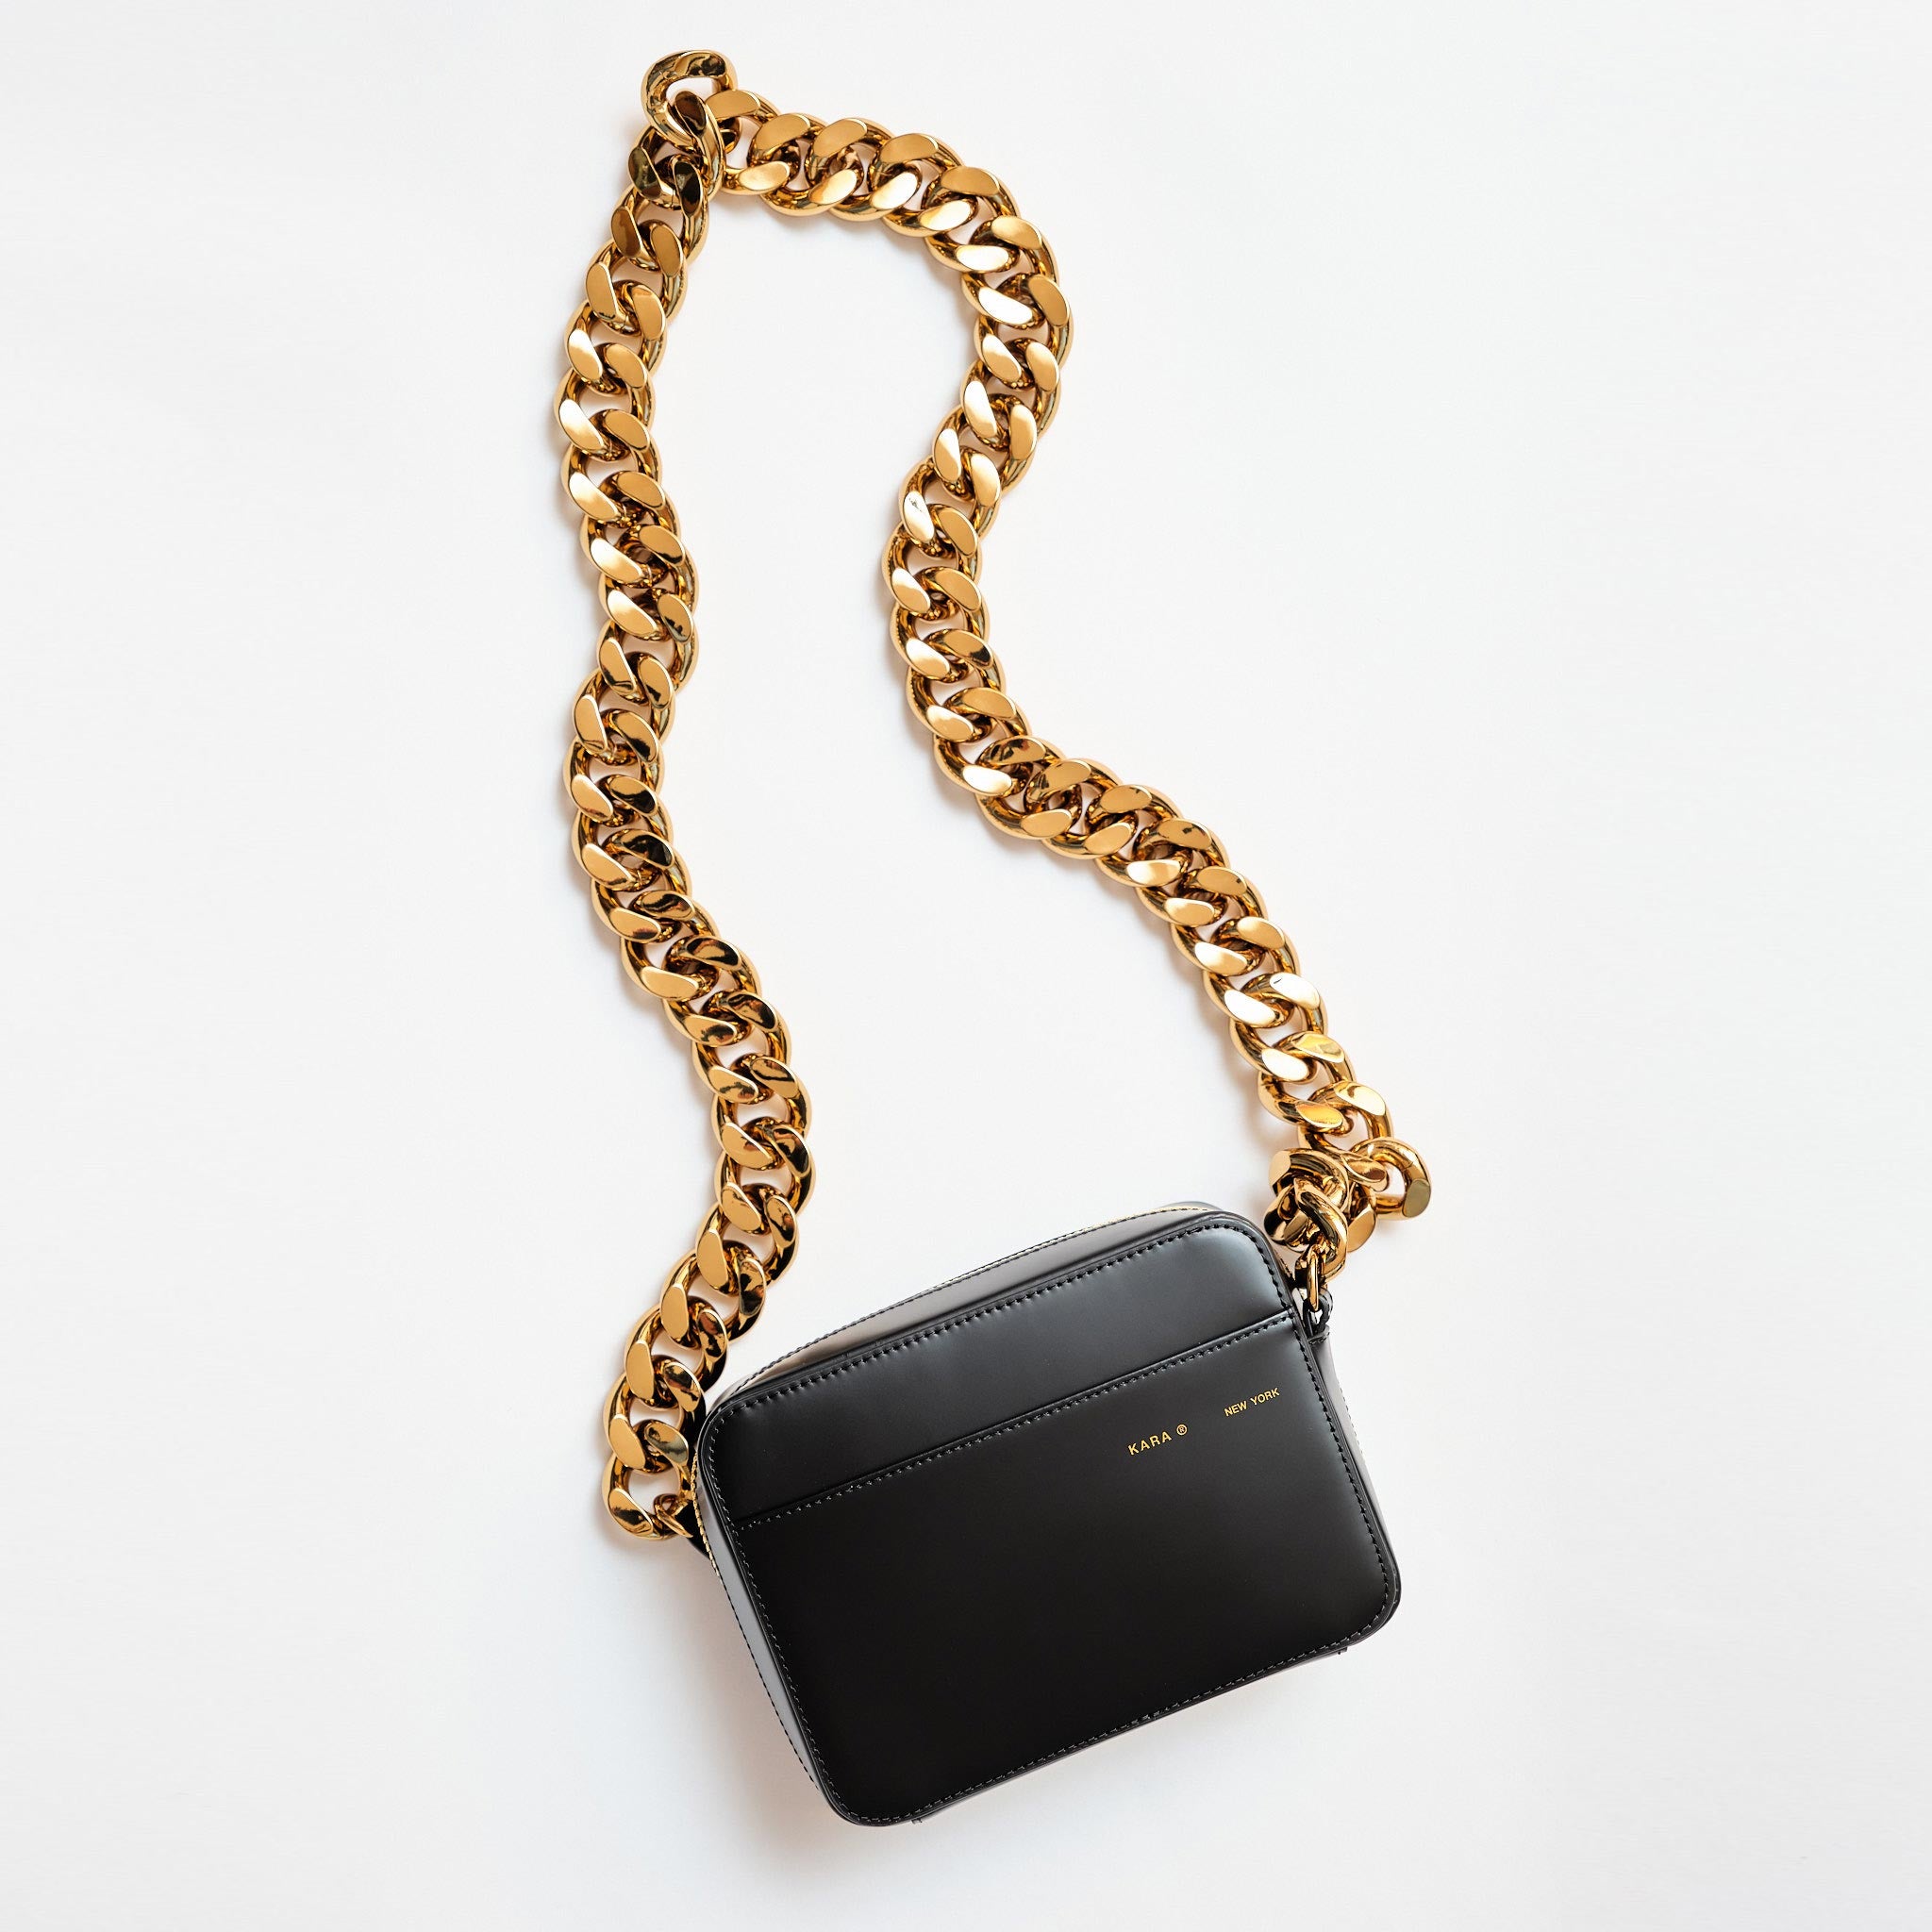 The black leather camera bag by KARA with heavy gold chain strap.